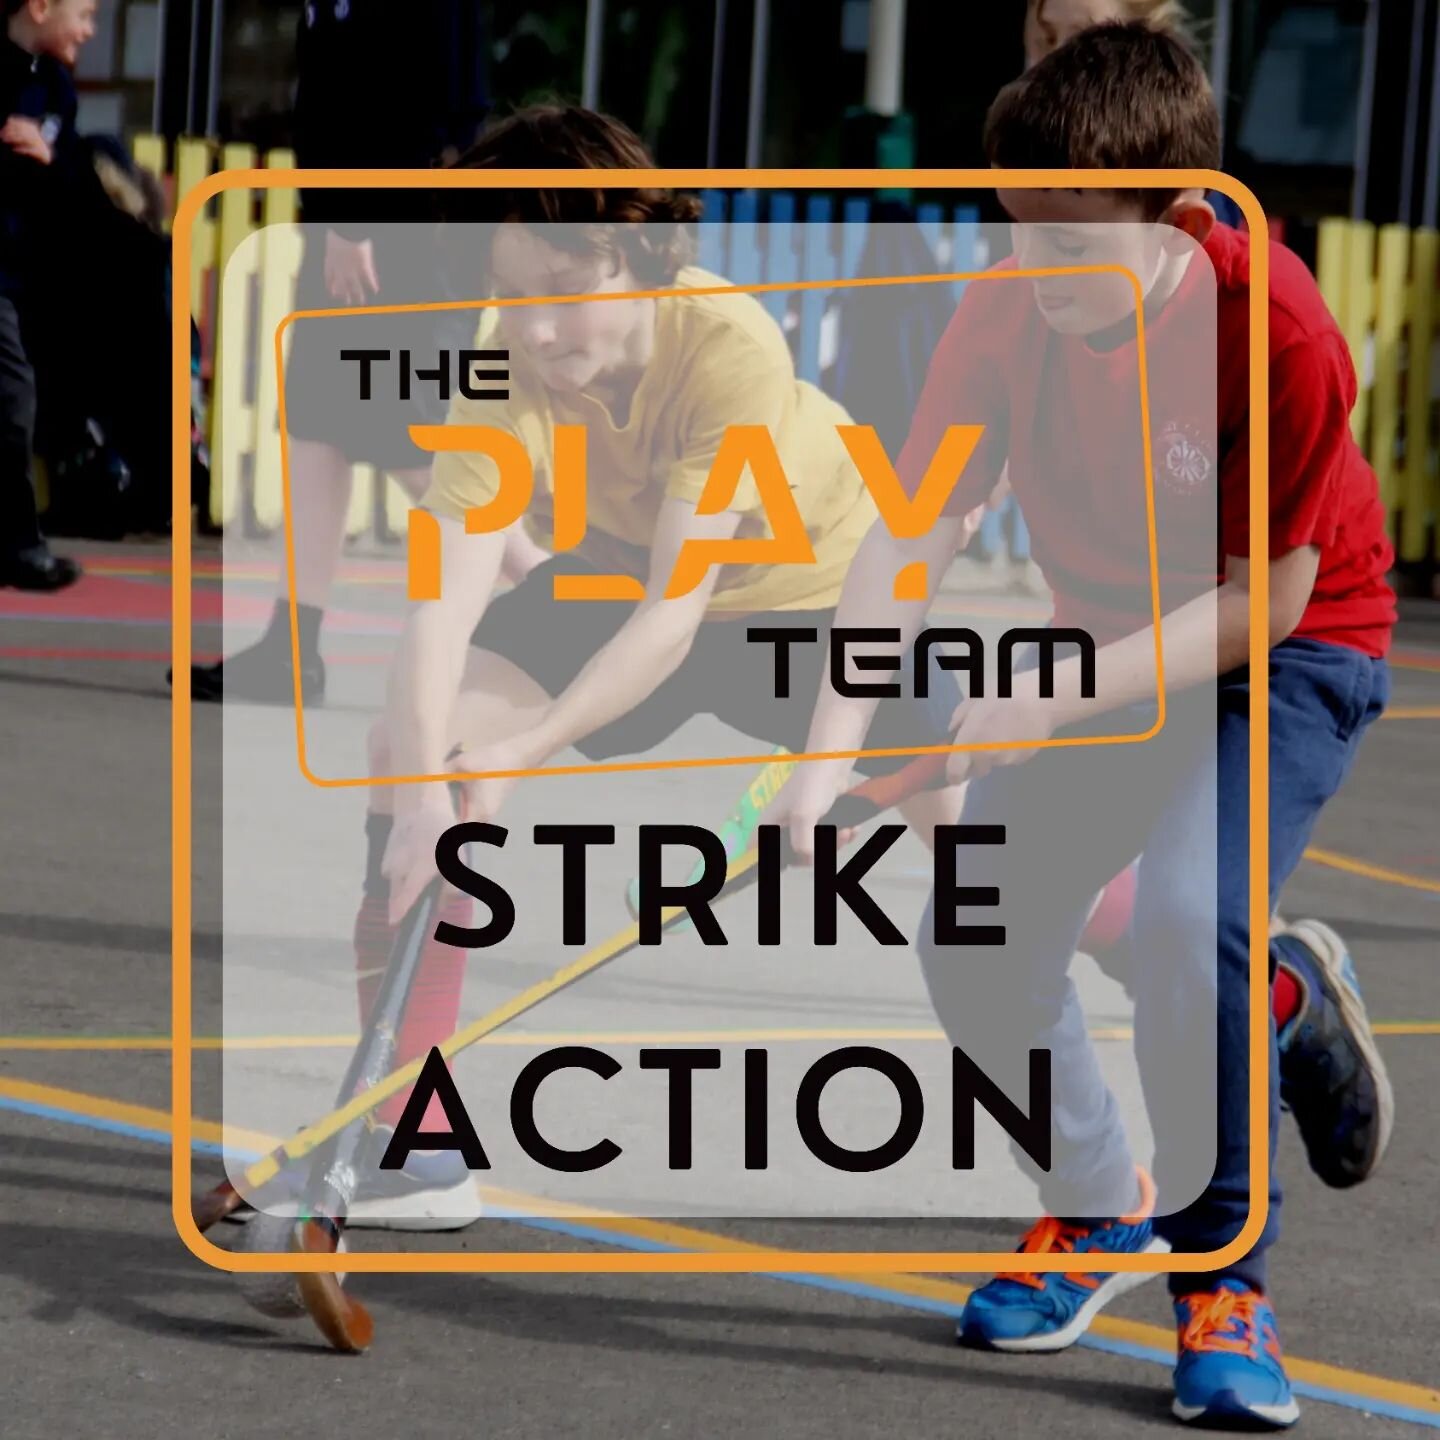 With the recent announcement of proposed strike action, we wanted to confirm the plans for our after-school clubs to allow all parents/guardians an opportunity to make suitable arrangements.

Despite the strikes, our clubs will go ahead (as planned)